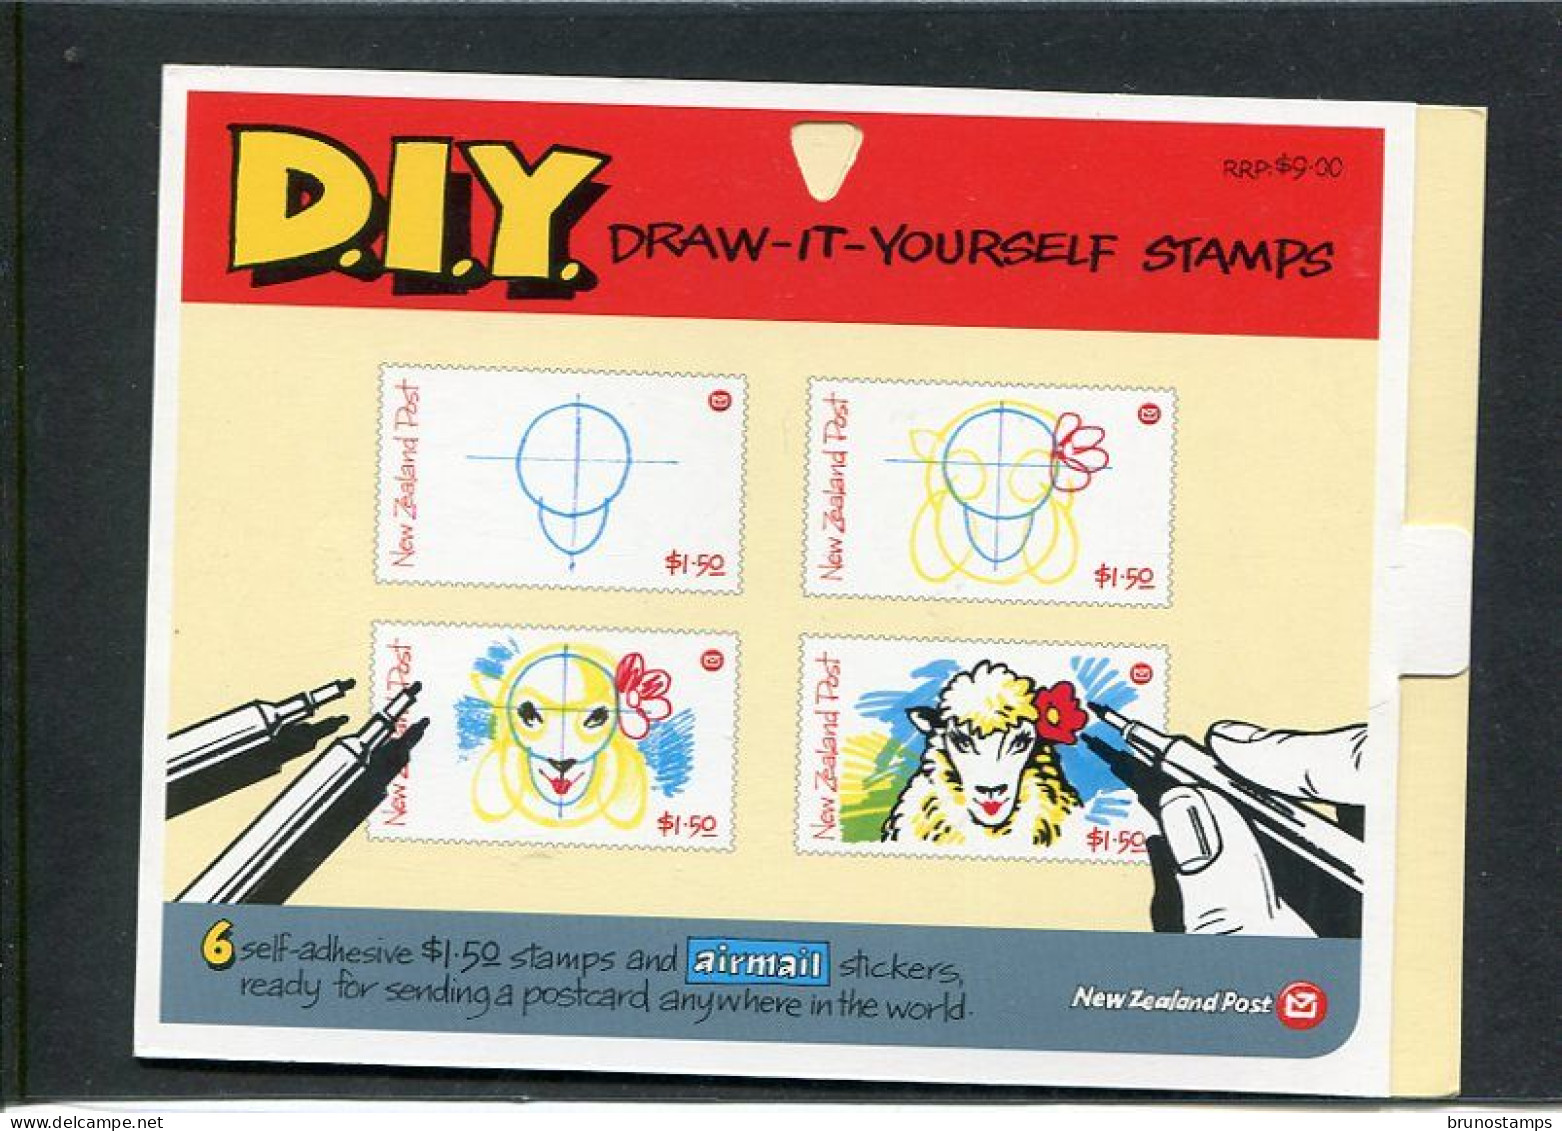 NEW ZEALAND - 2004  DRAW IT YOURSELF STAMPS  SELF ADHESIVE  SHEETLET  OF 6 MINT NH - Neufs